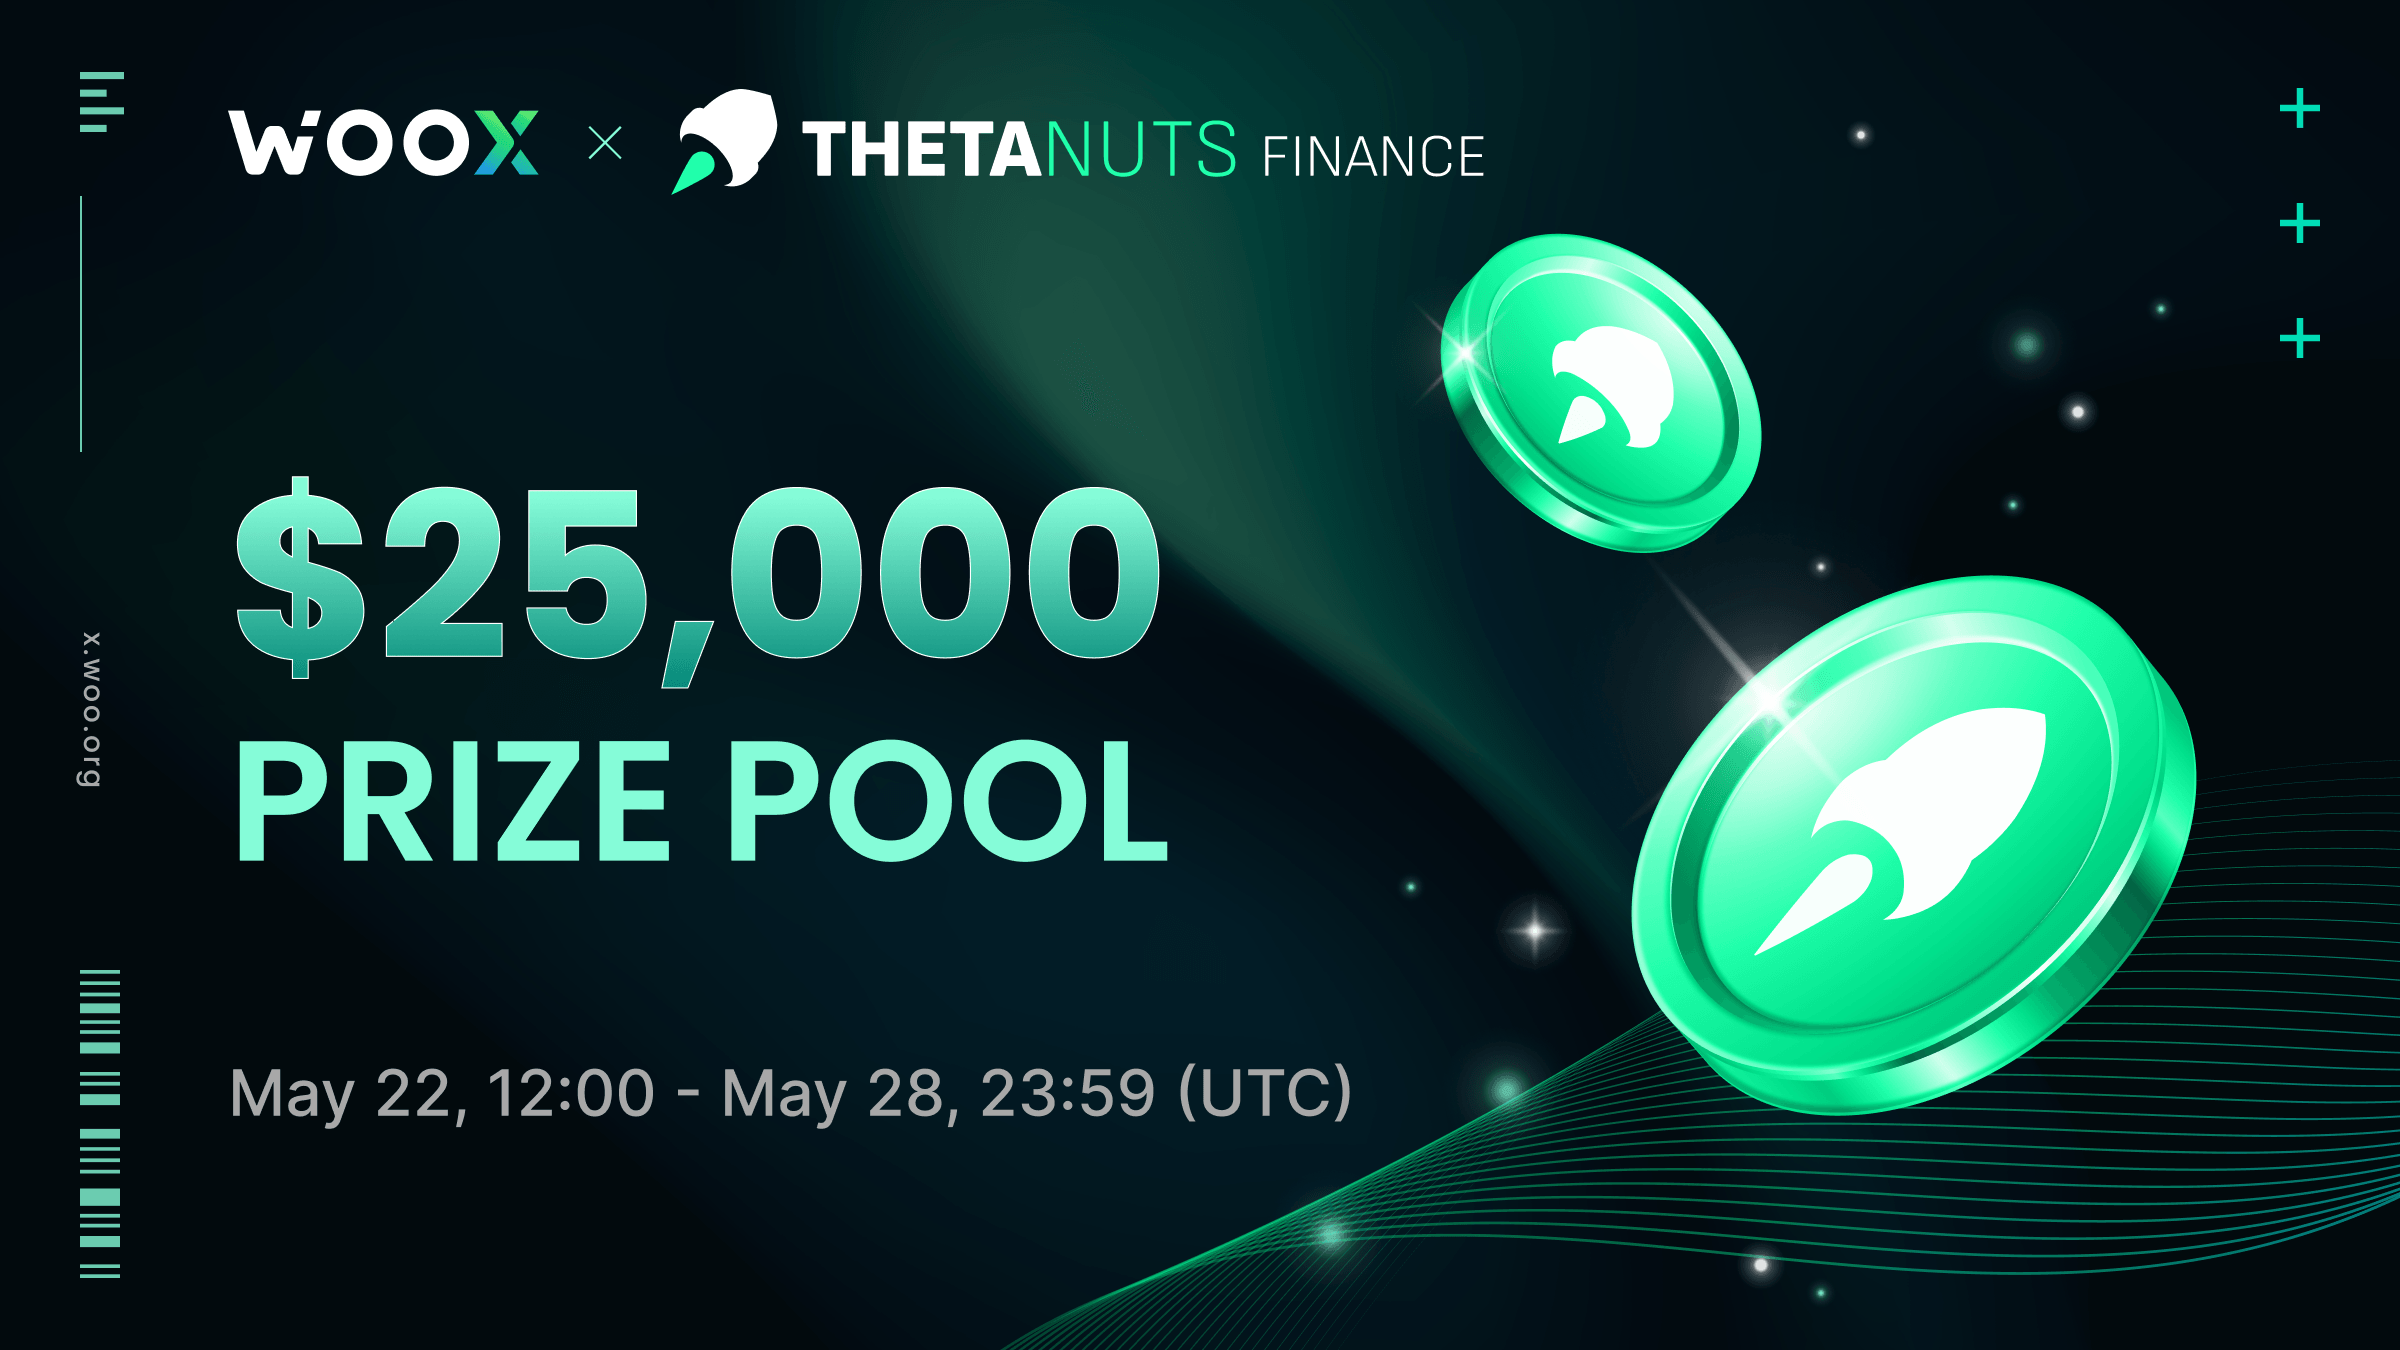 Go nuts for rewards: Dive into our $25,000 NUTS prize pool event!